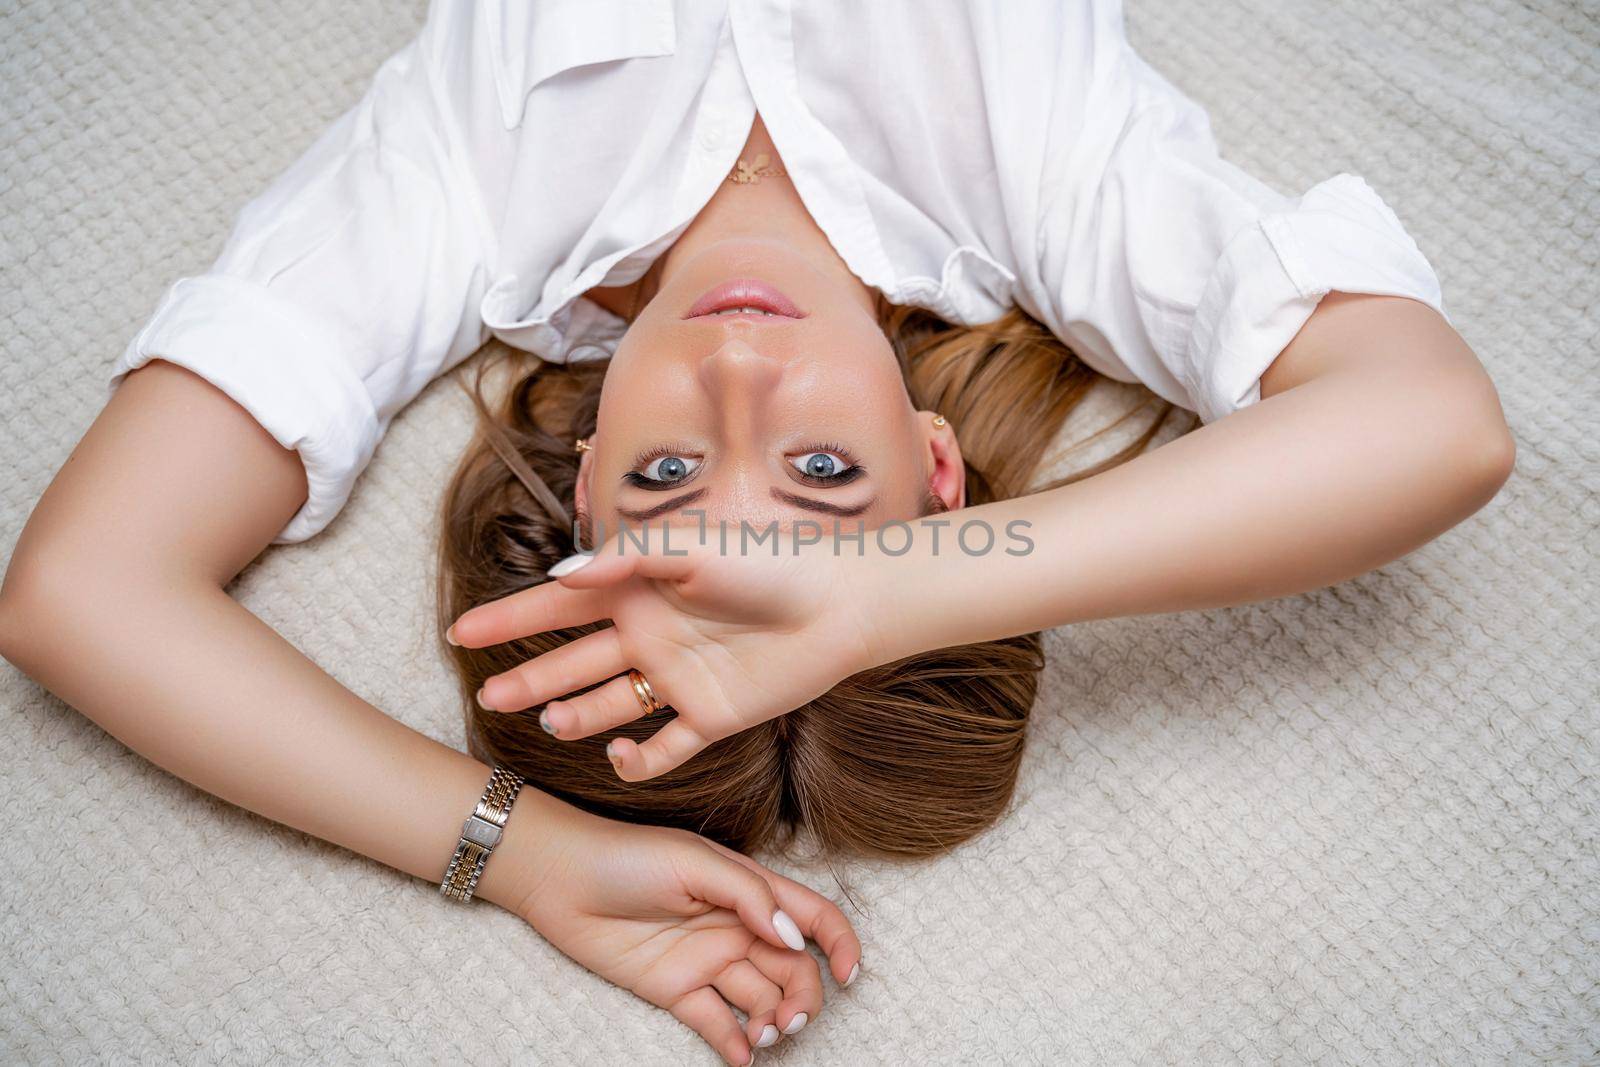 The woman lies on the bed on her back, top view. She looks straight ahead, wearing a white shirt.